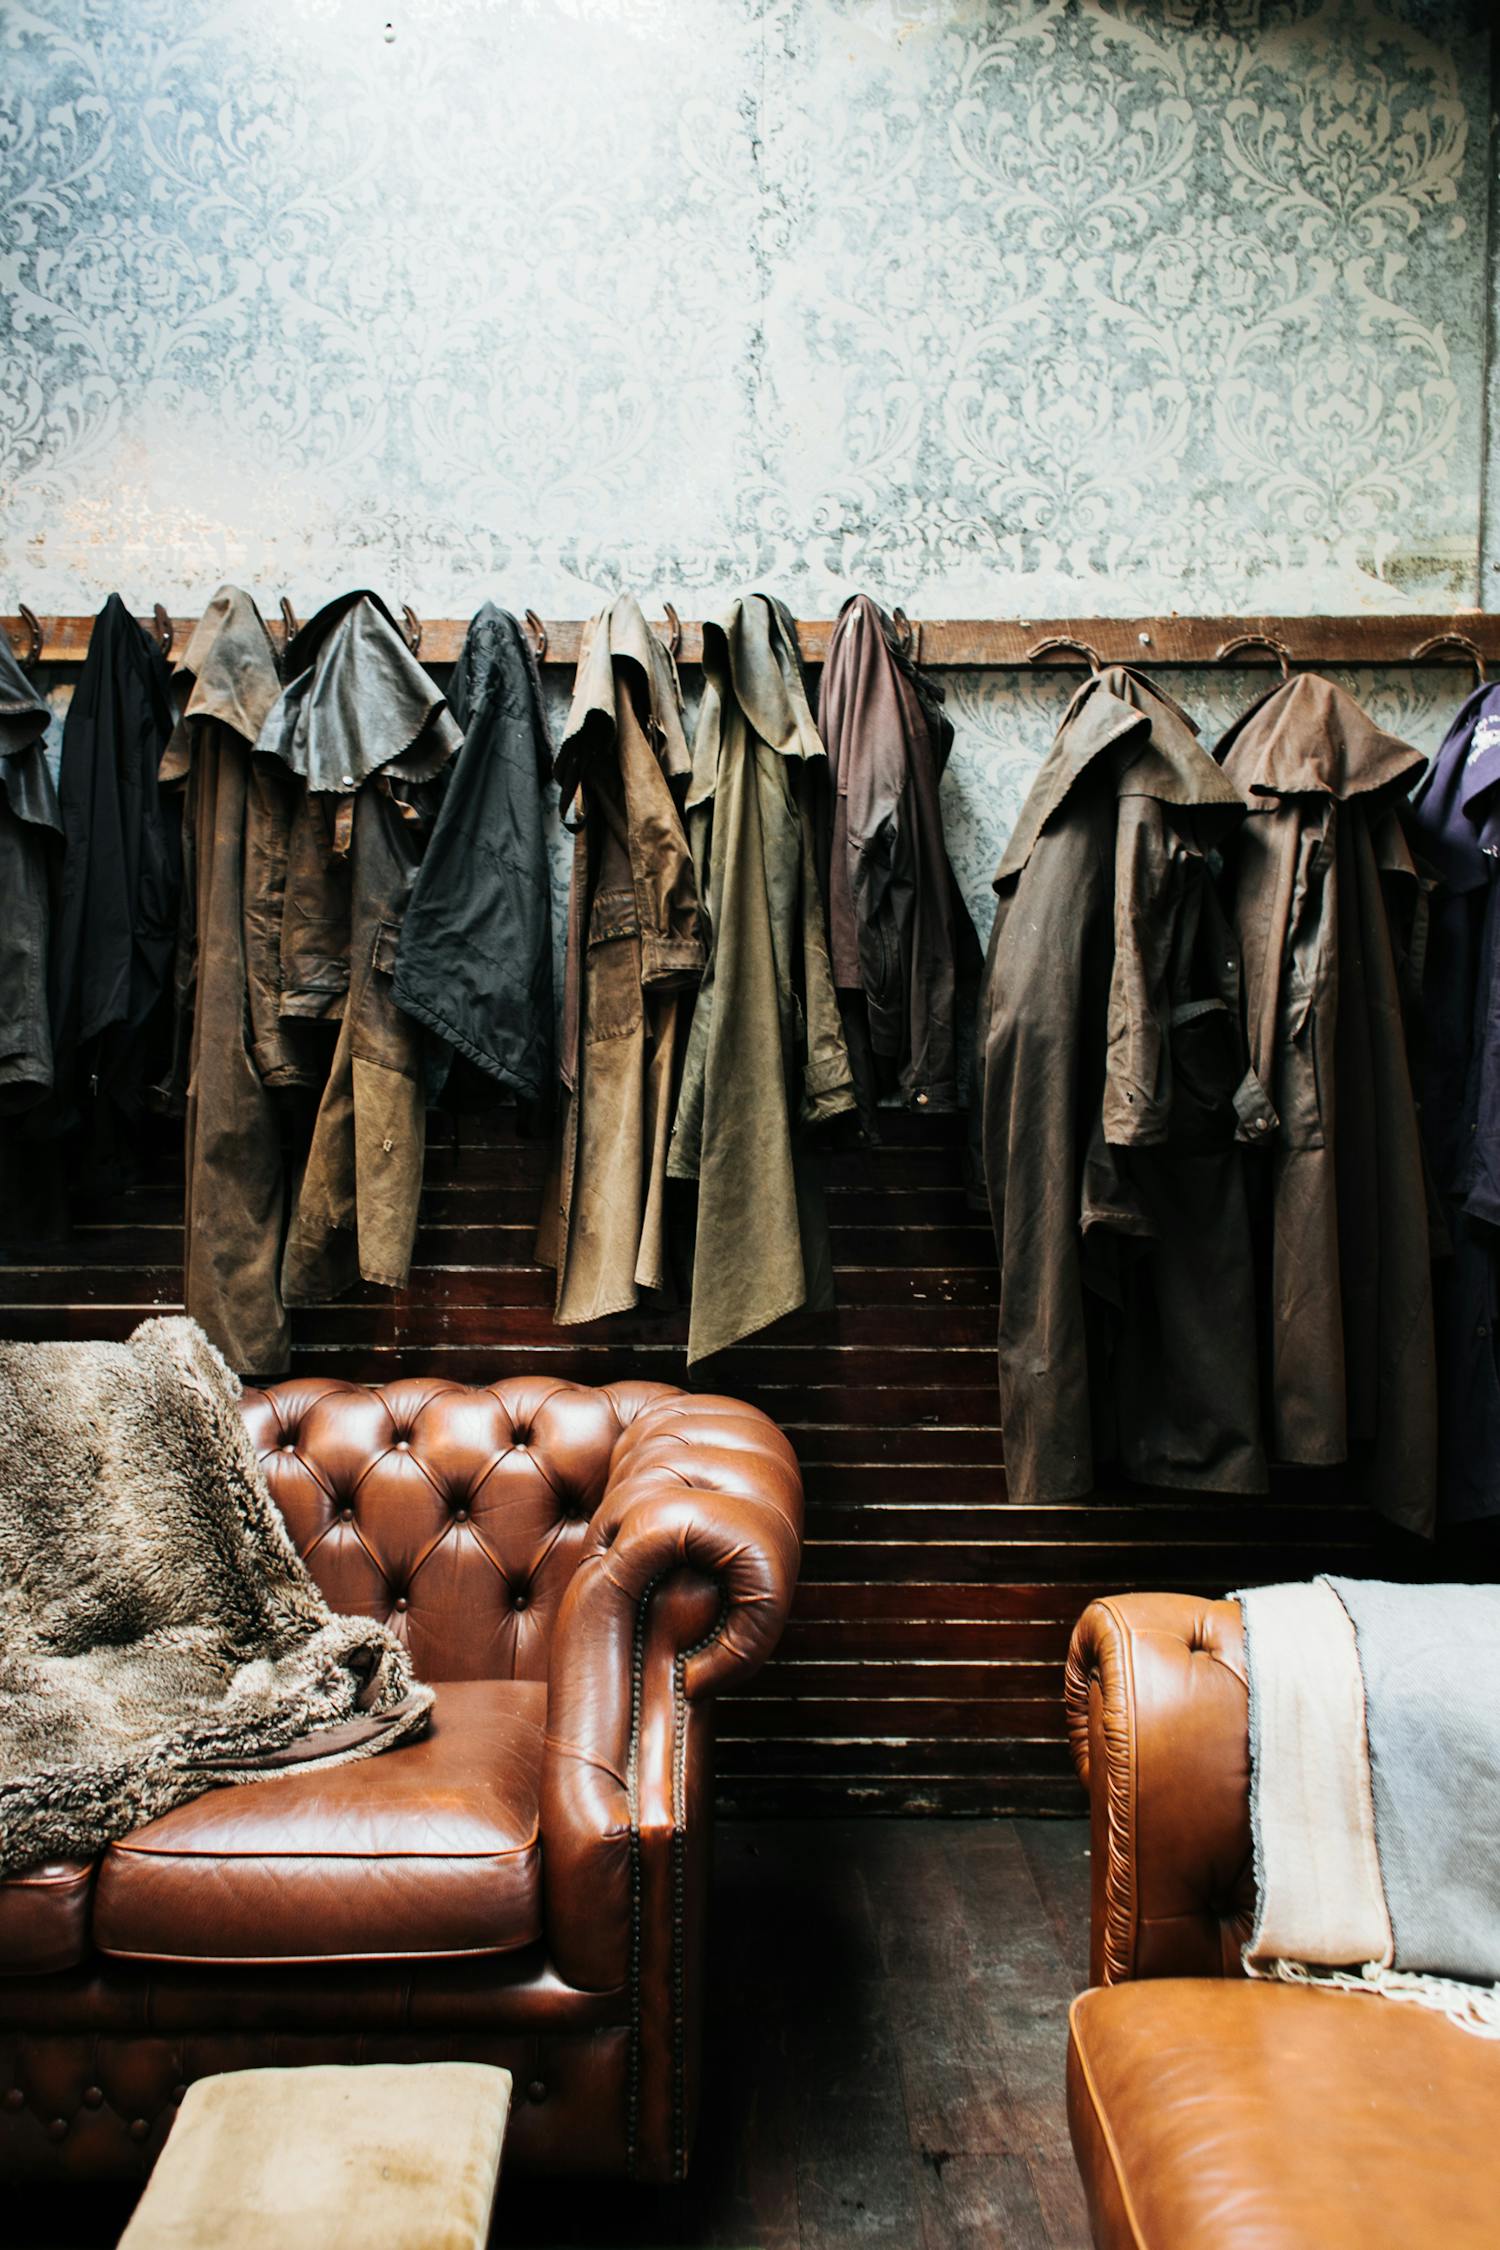 Clothes hanging on wall in vintage styled studio with sofas · Free ...